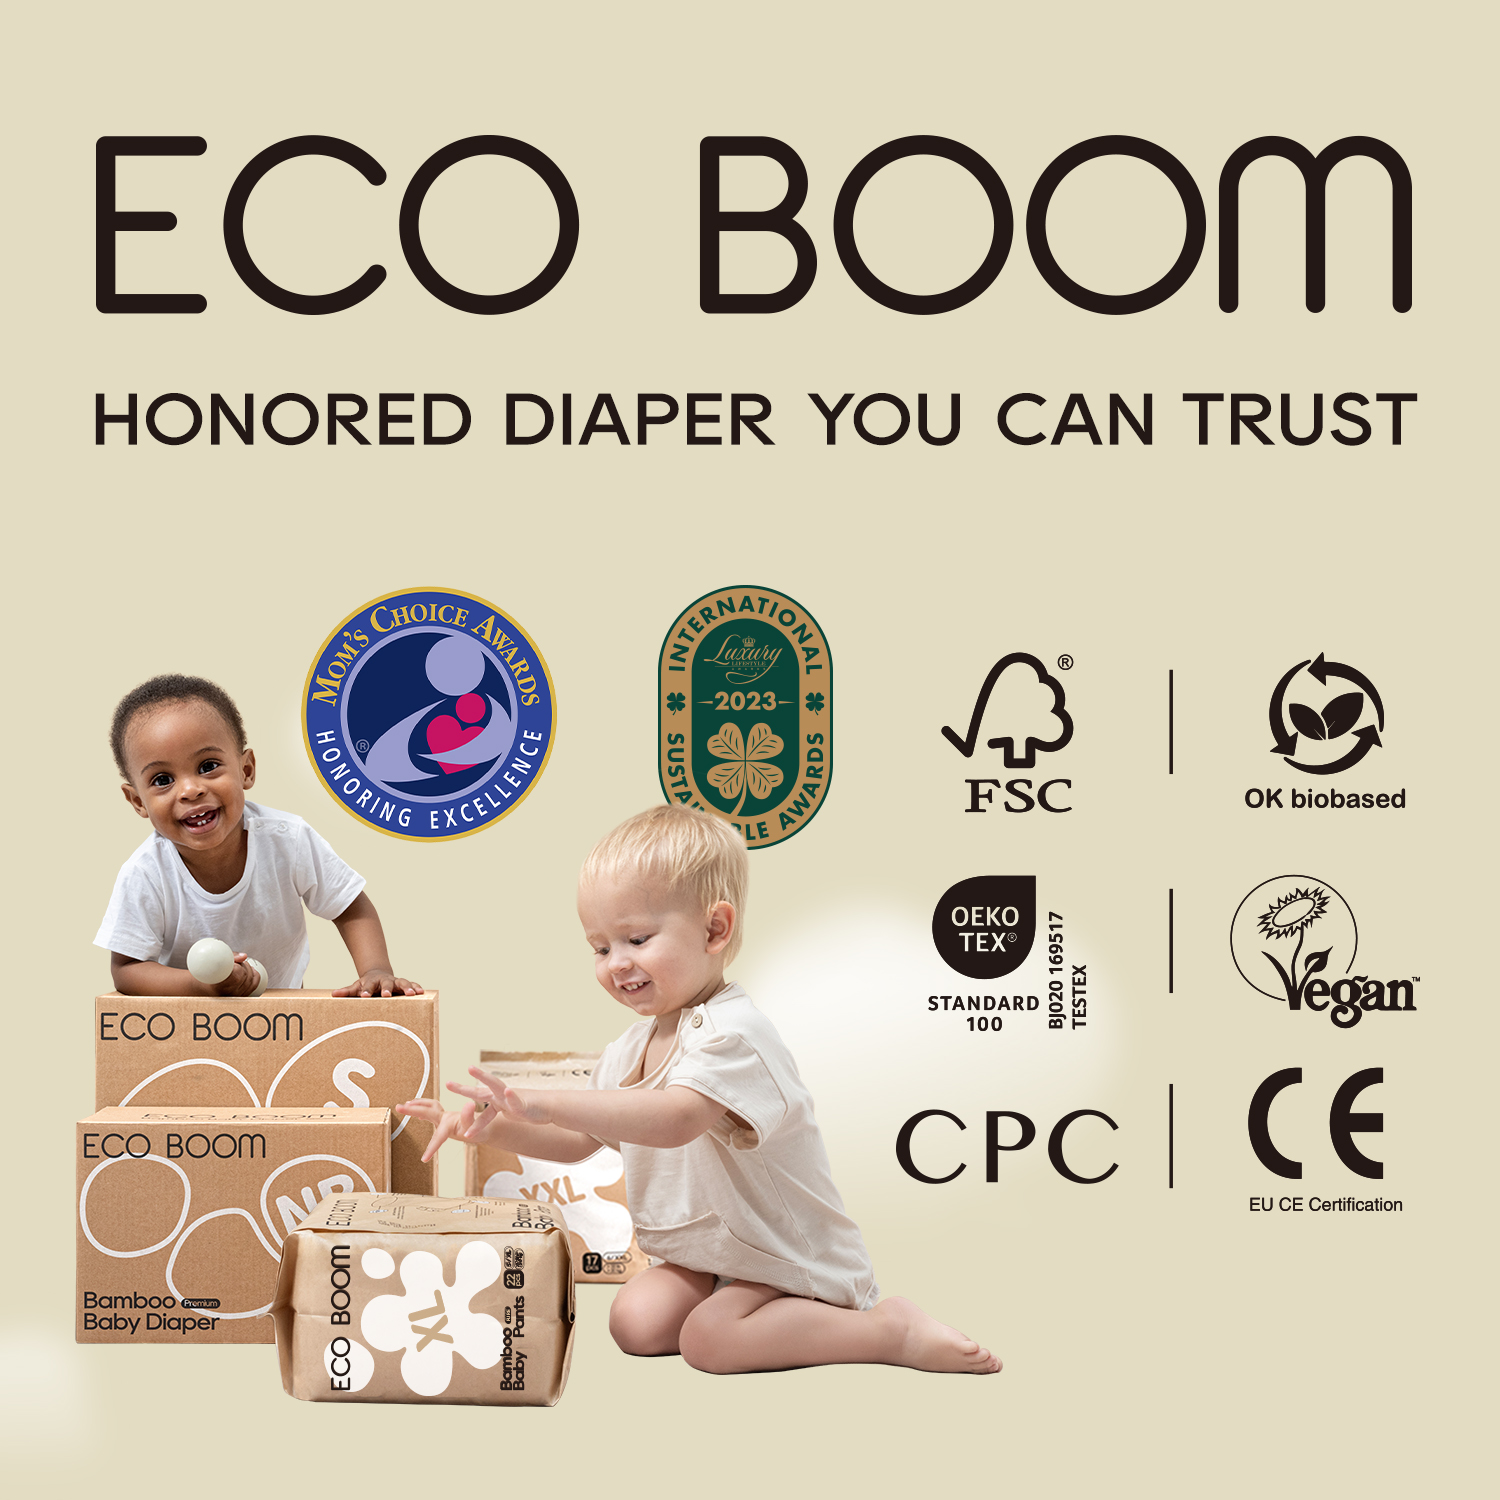 How to Judge the Quality of a Diaper Based on Its Certifications